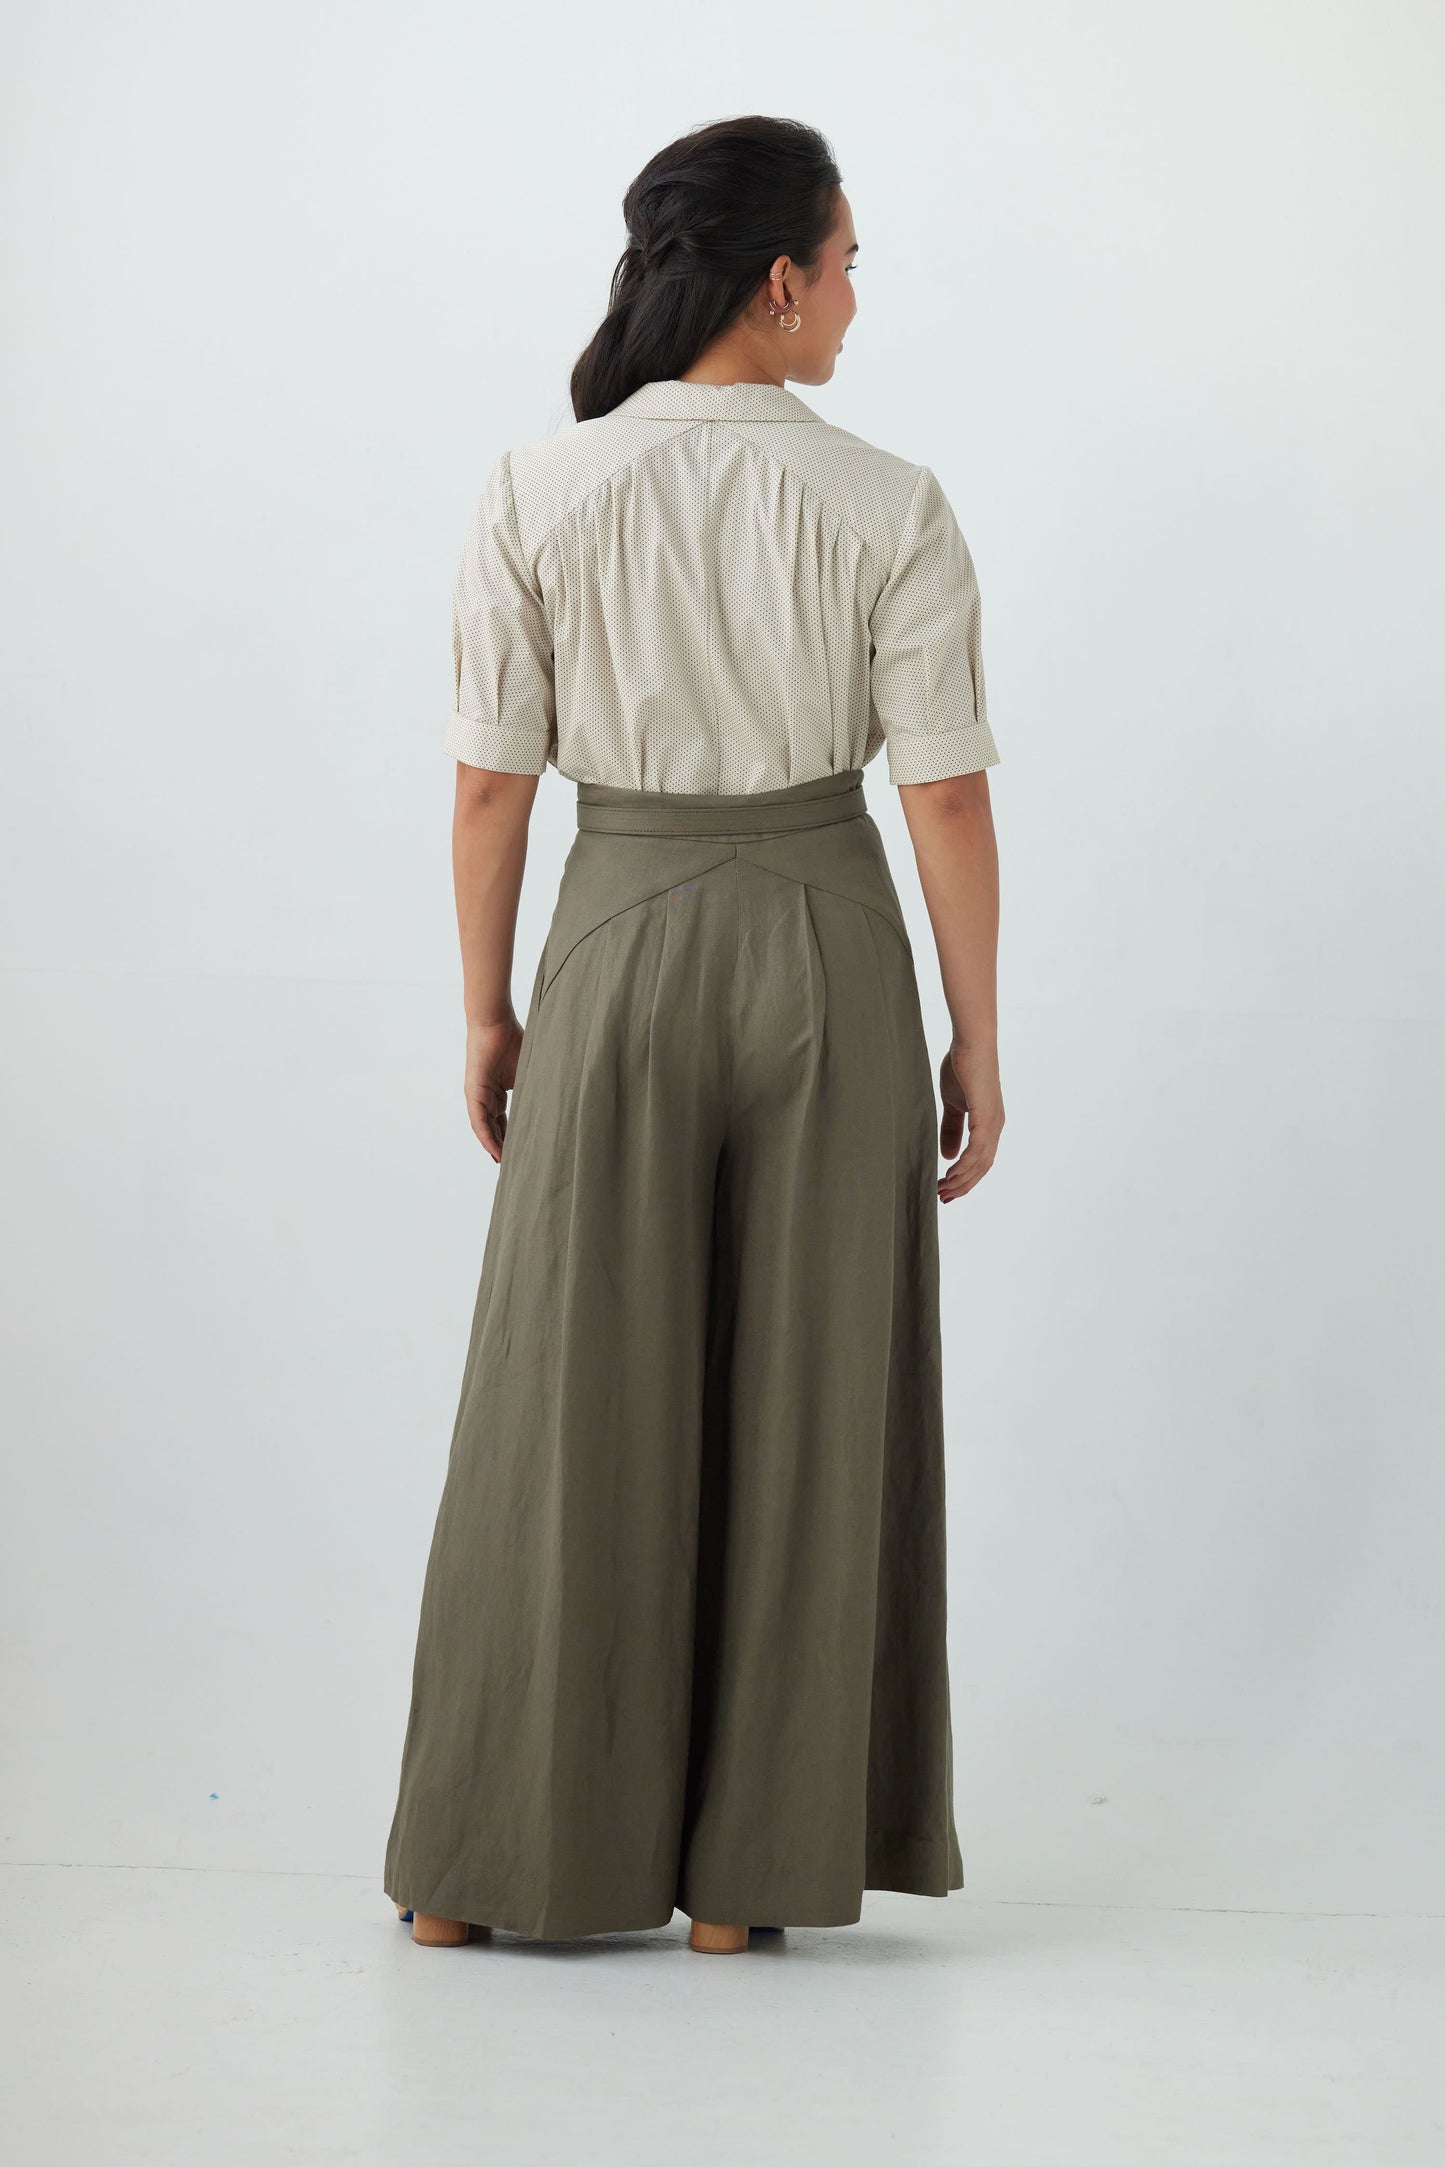 Katherine Pant in Linen Blend Pants CHRISTINE ALCALAY   